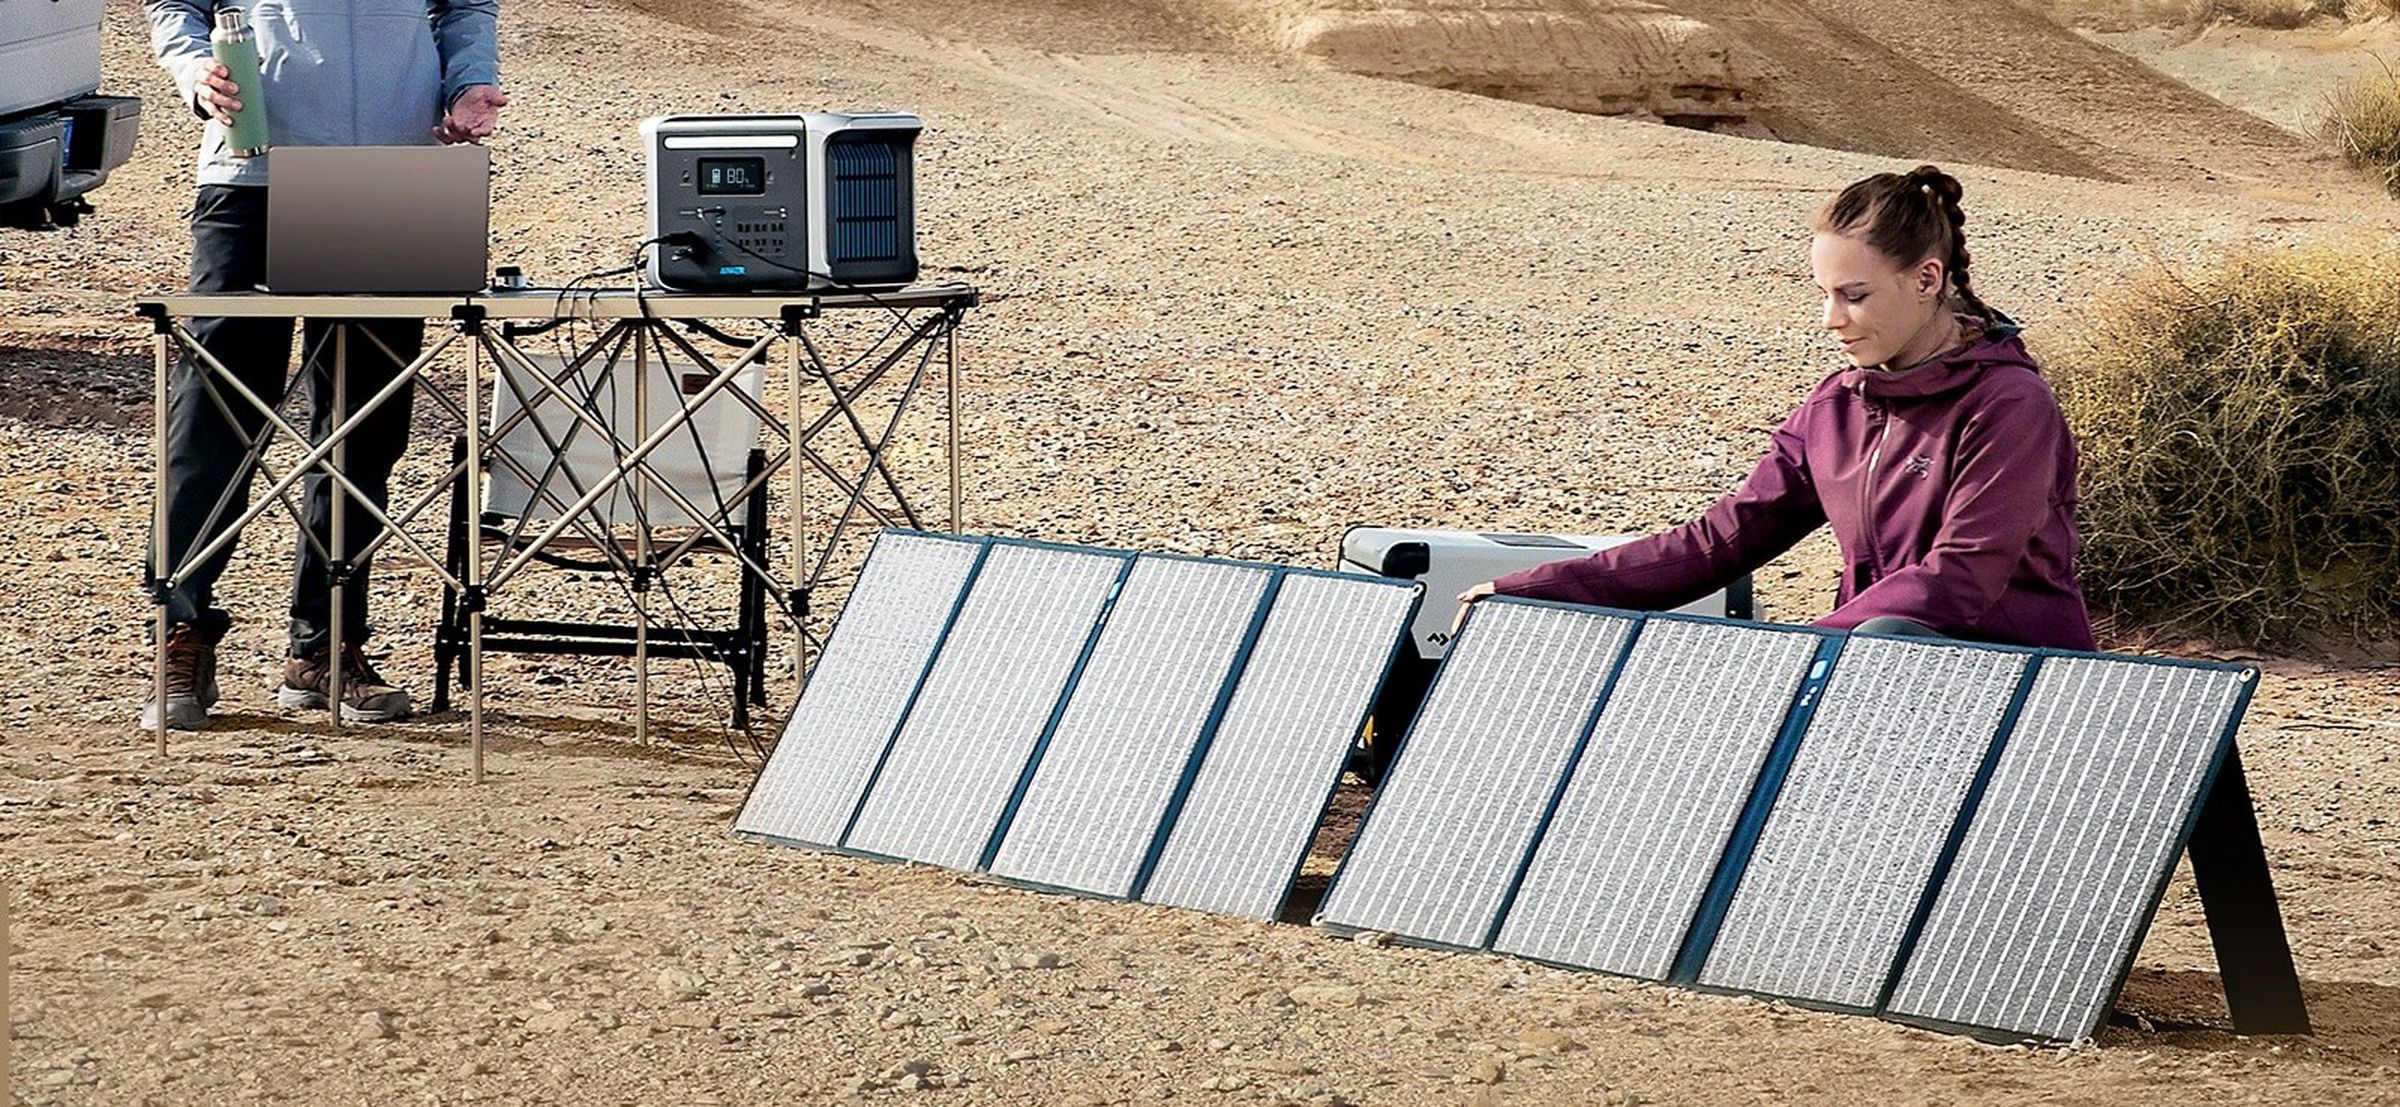 A woman kneels to set up eight solar panels in a desert